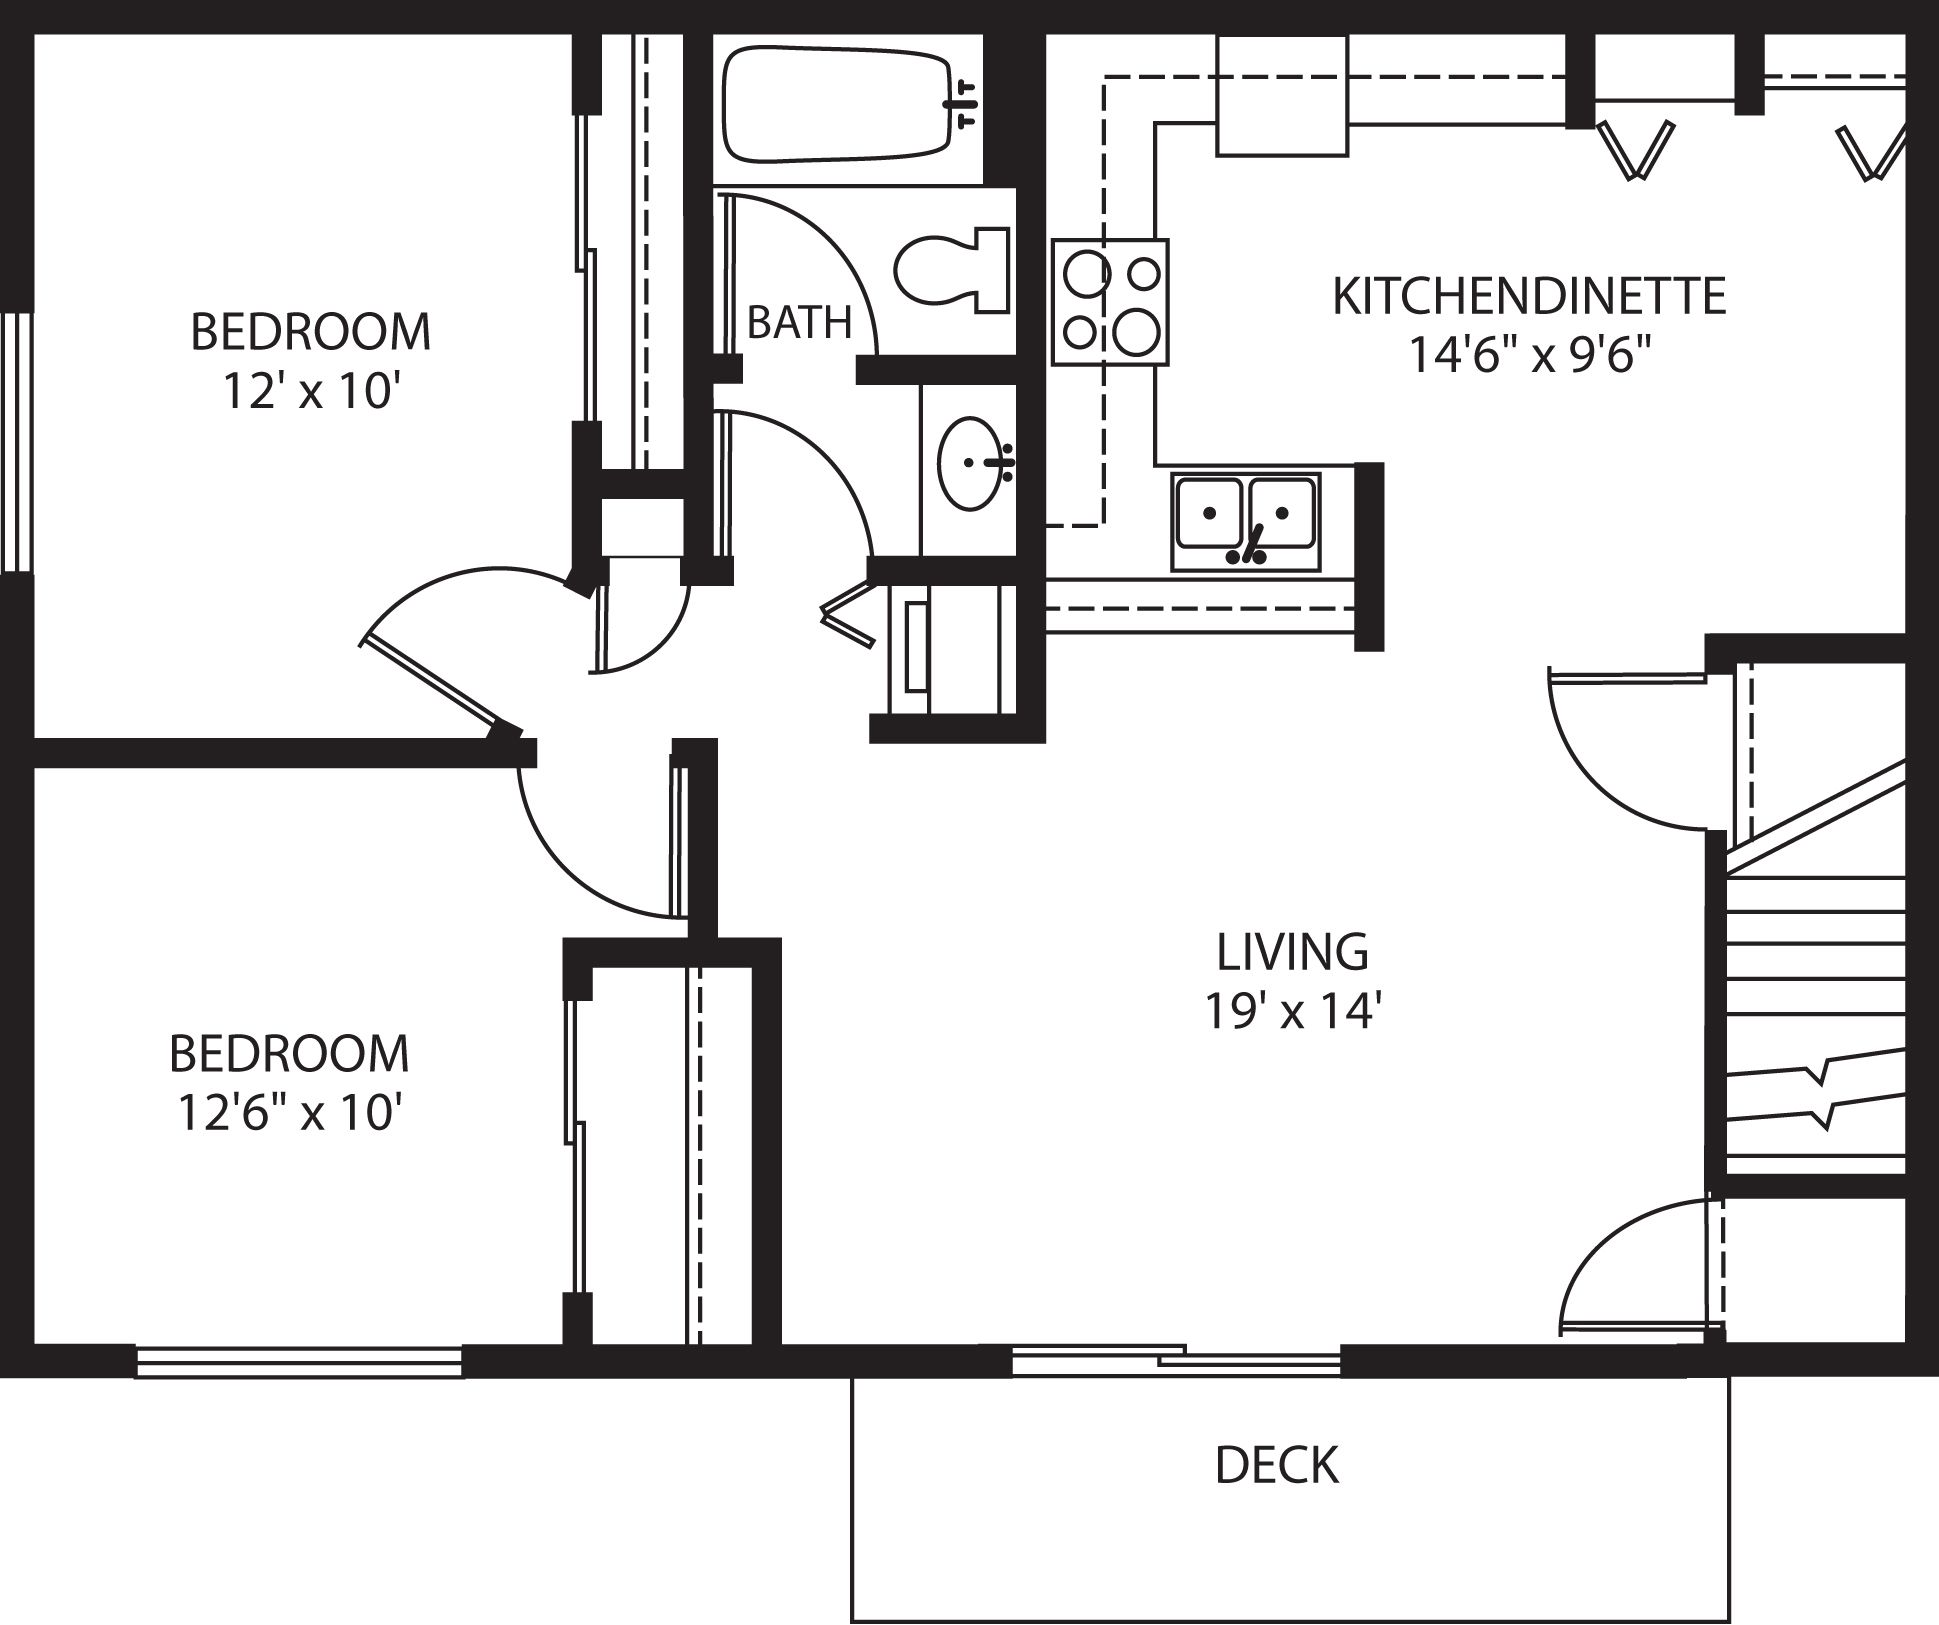 2 bedroom apartment over garage plans Google Search